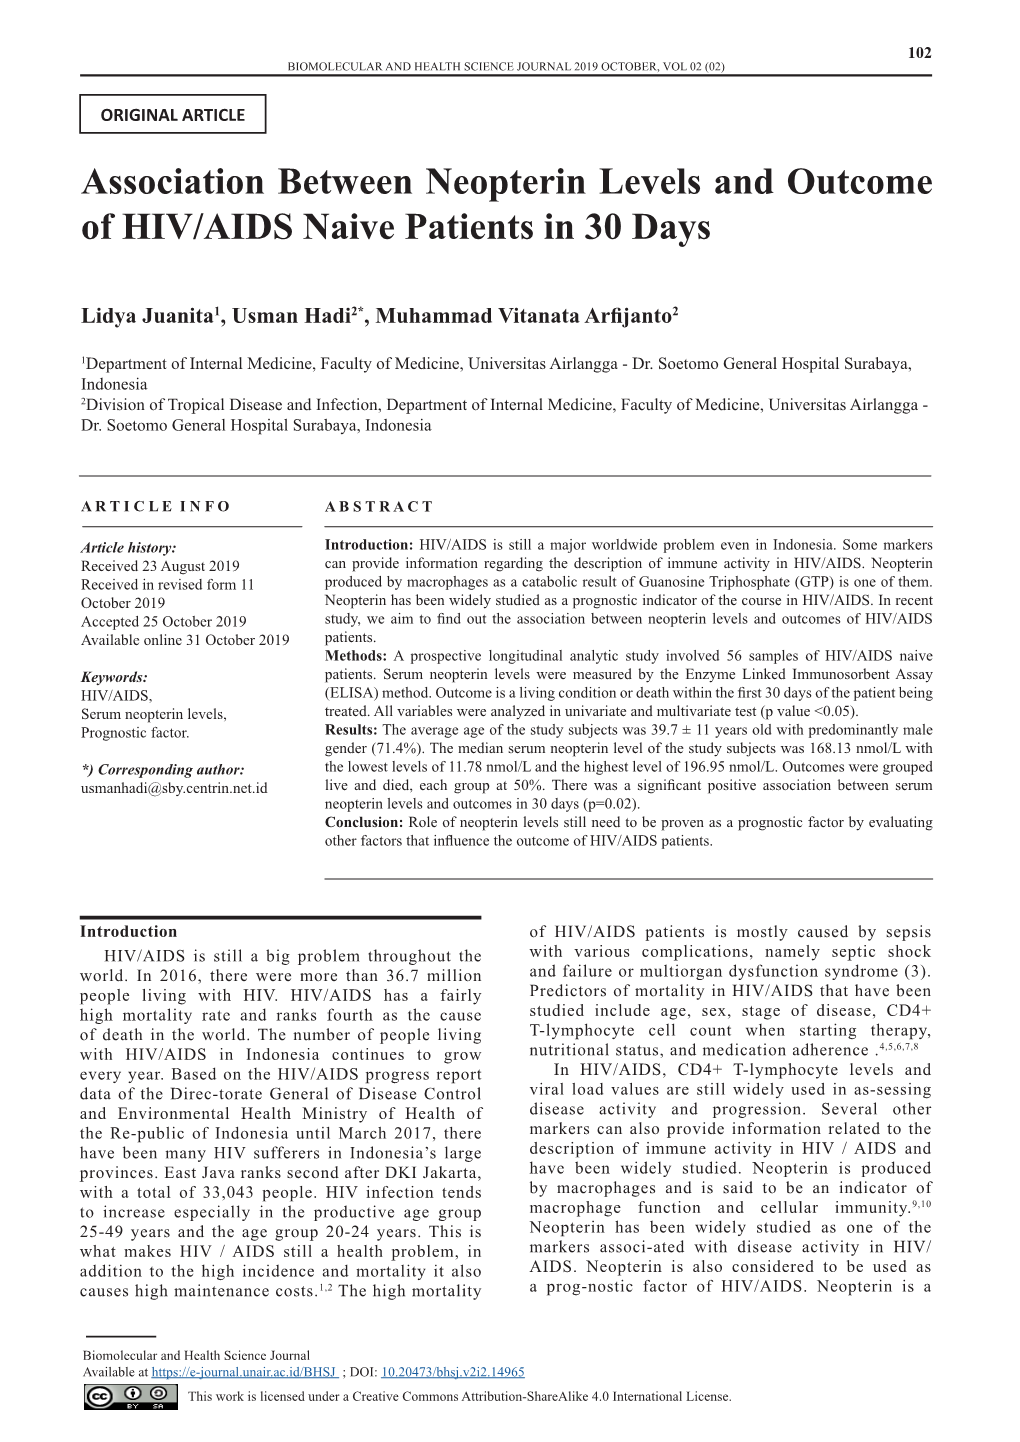 Association Between Neopterin Levels and Outcome of HIV/AIDS Naive Patients in 30 Days